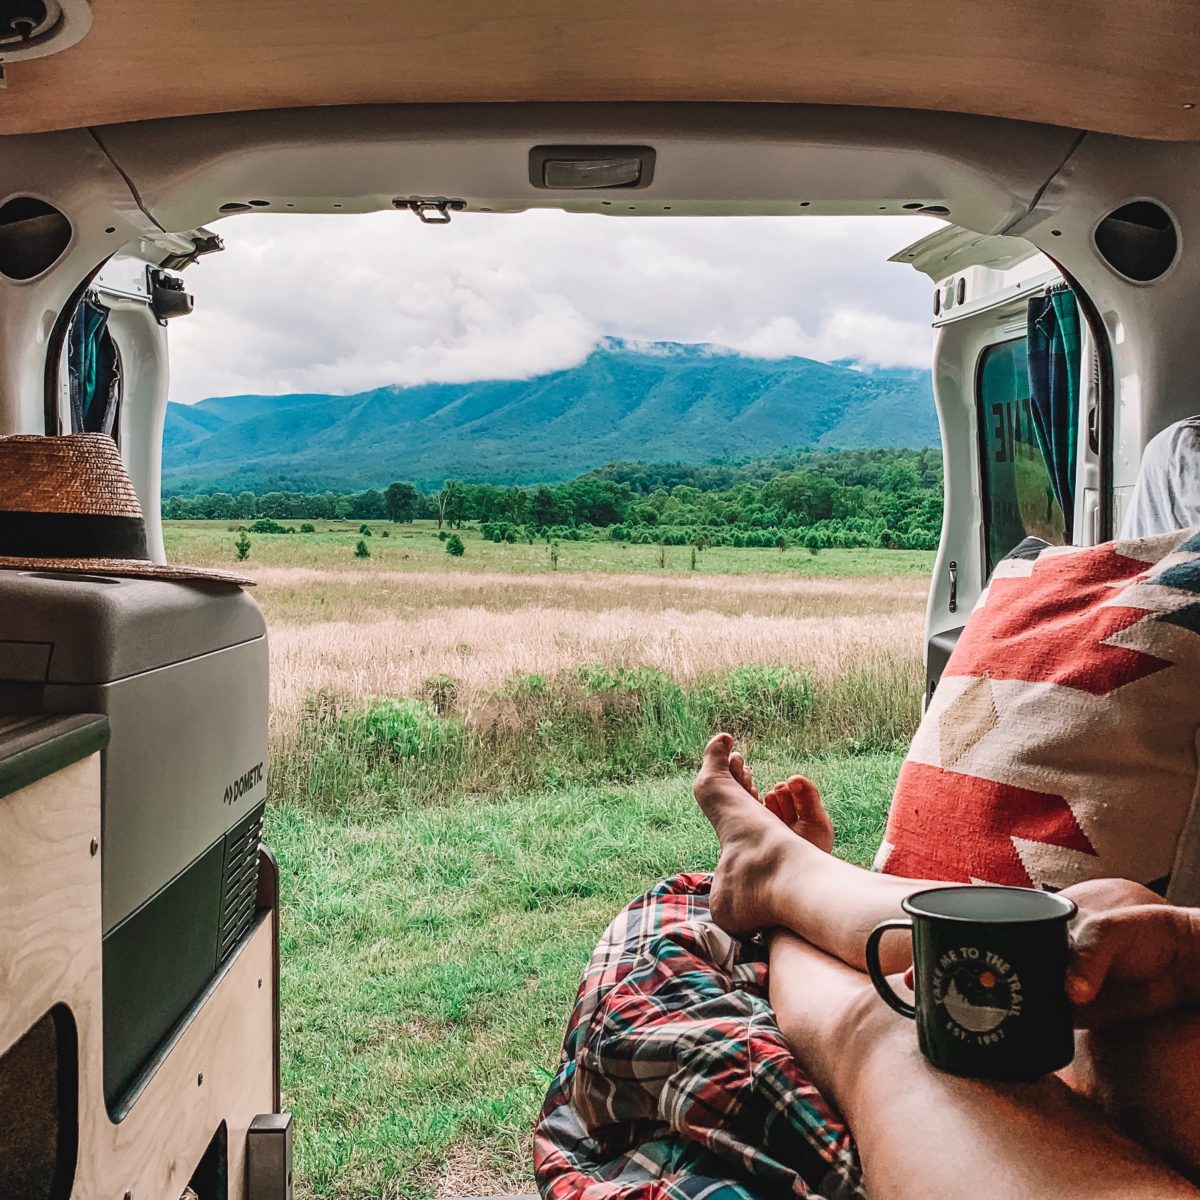 Take your Voyager Campervan to the Great Smoky Mountains in Tennessee!